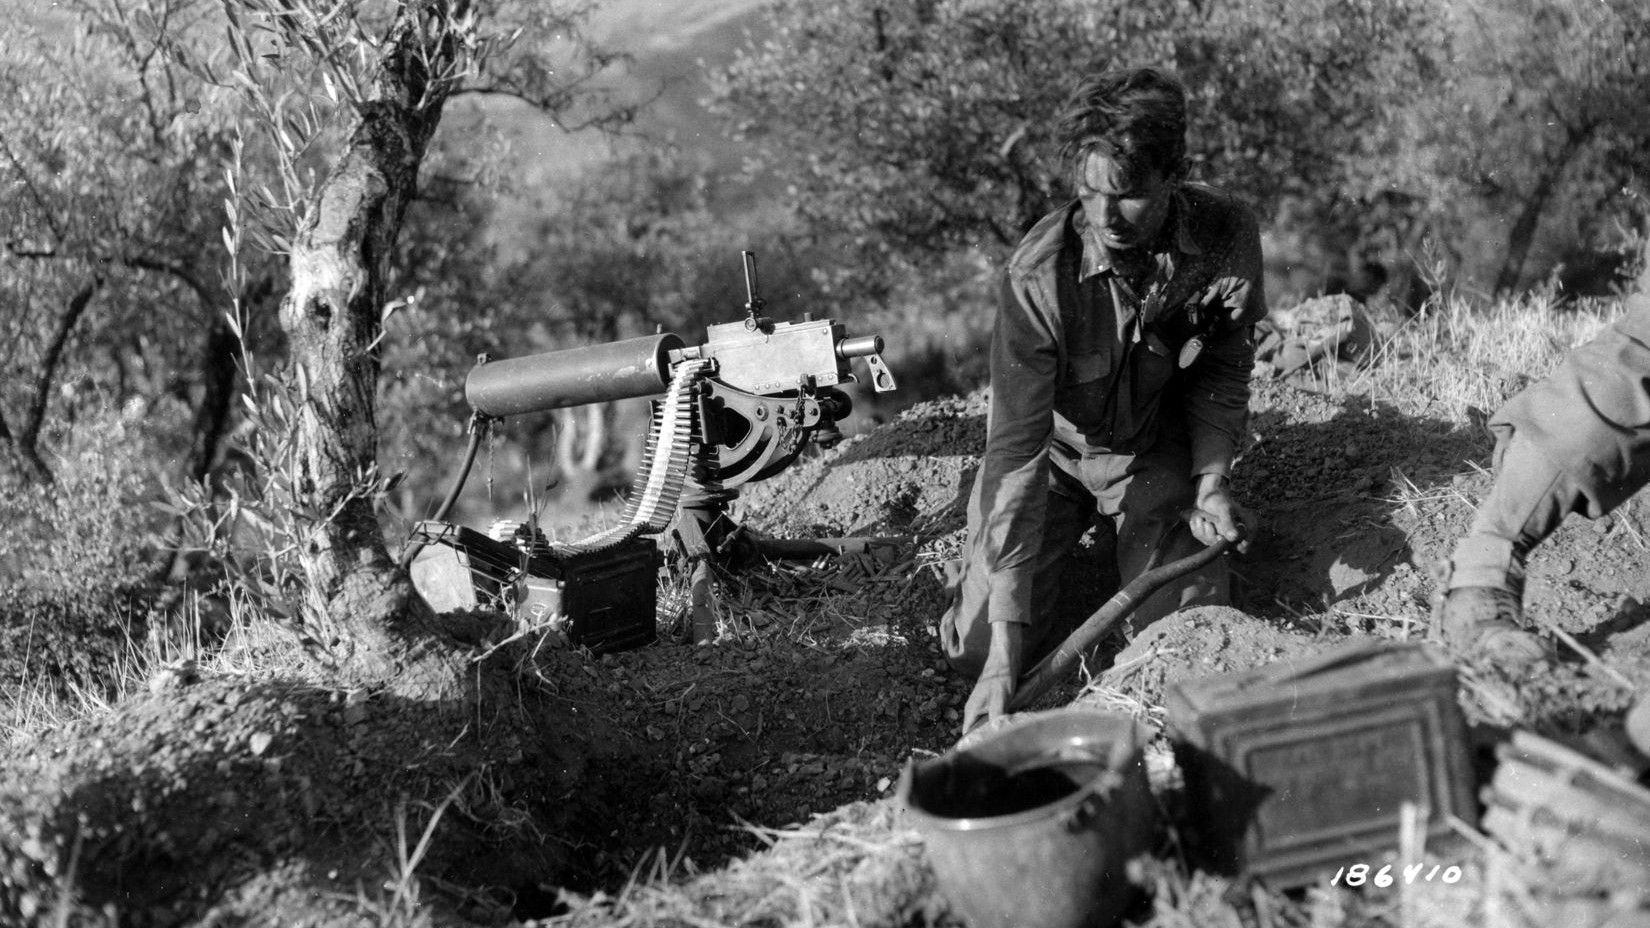 On August 11, 1943, an American soldier digs in with his heavy machine gun on a hillside near Brolo. U.S. forces attempted to outflank German troops with an amphibious landing near this site during Operation Husky.